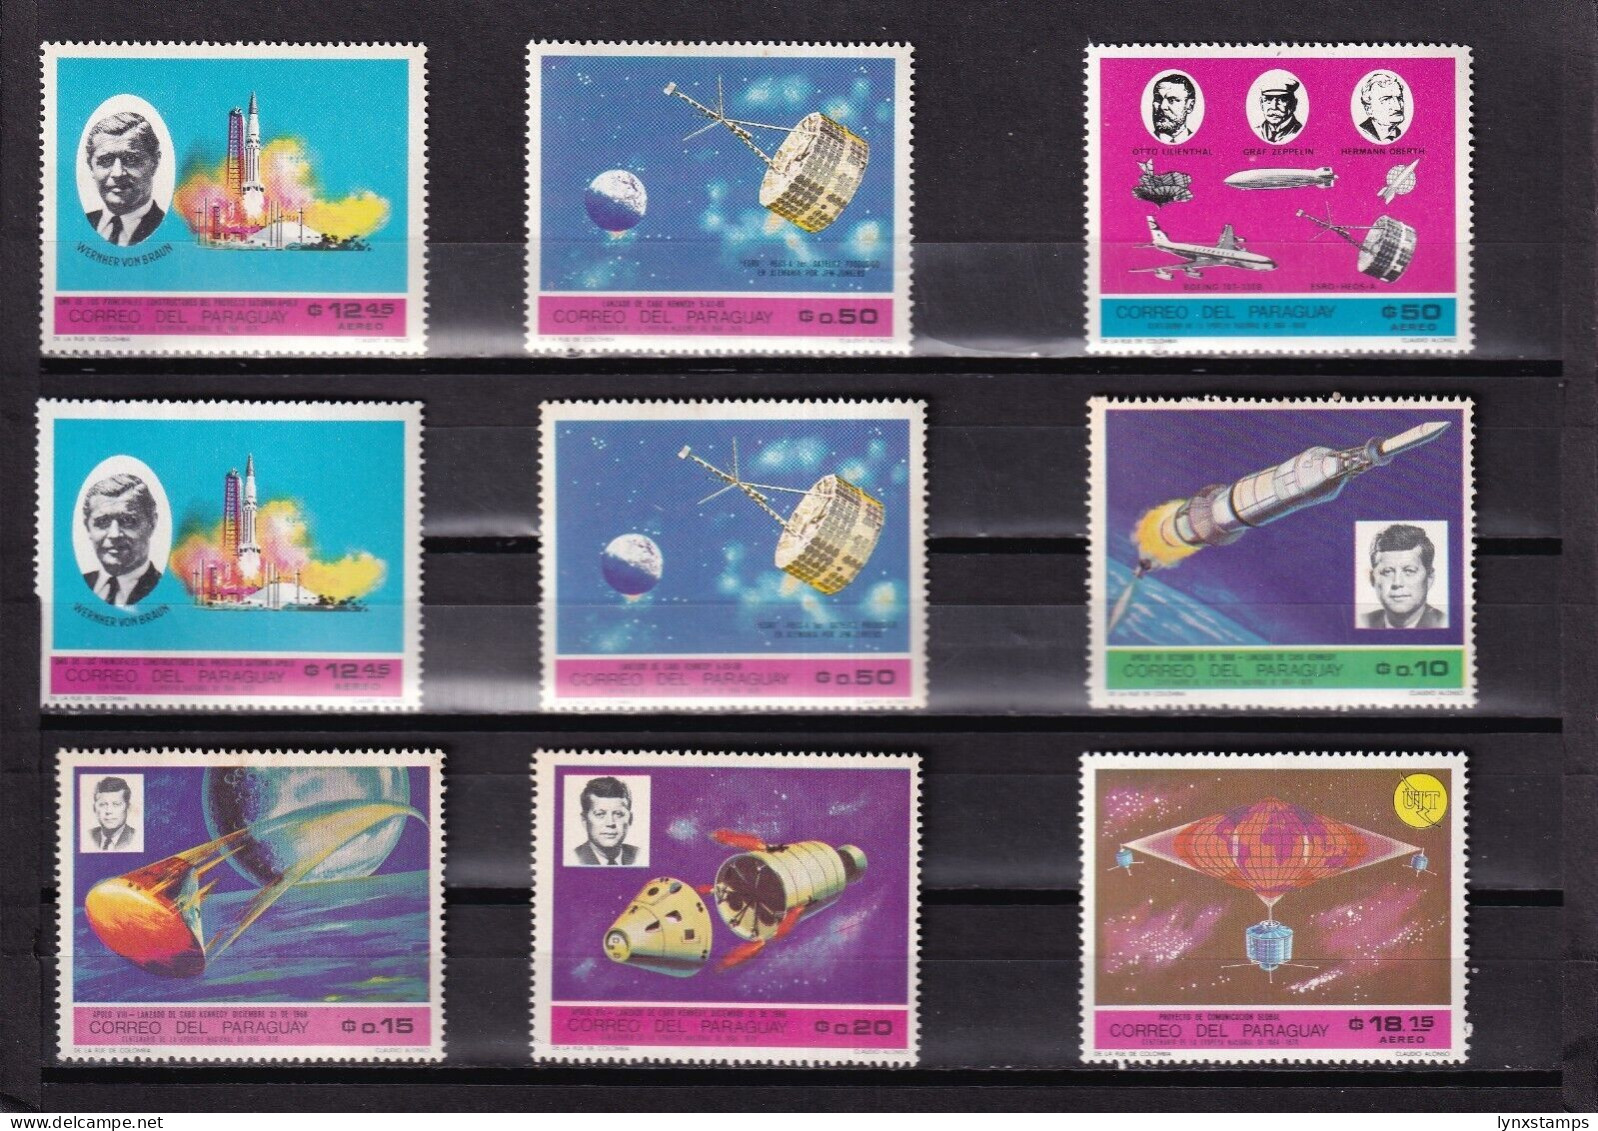 ER03 Paraguay 1969 Advances In Space Research MNH Stamps - Paraguay